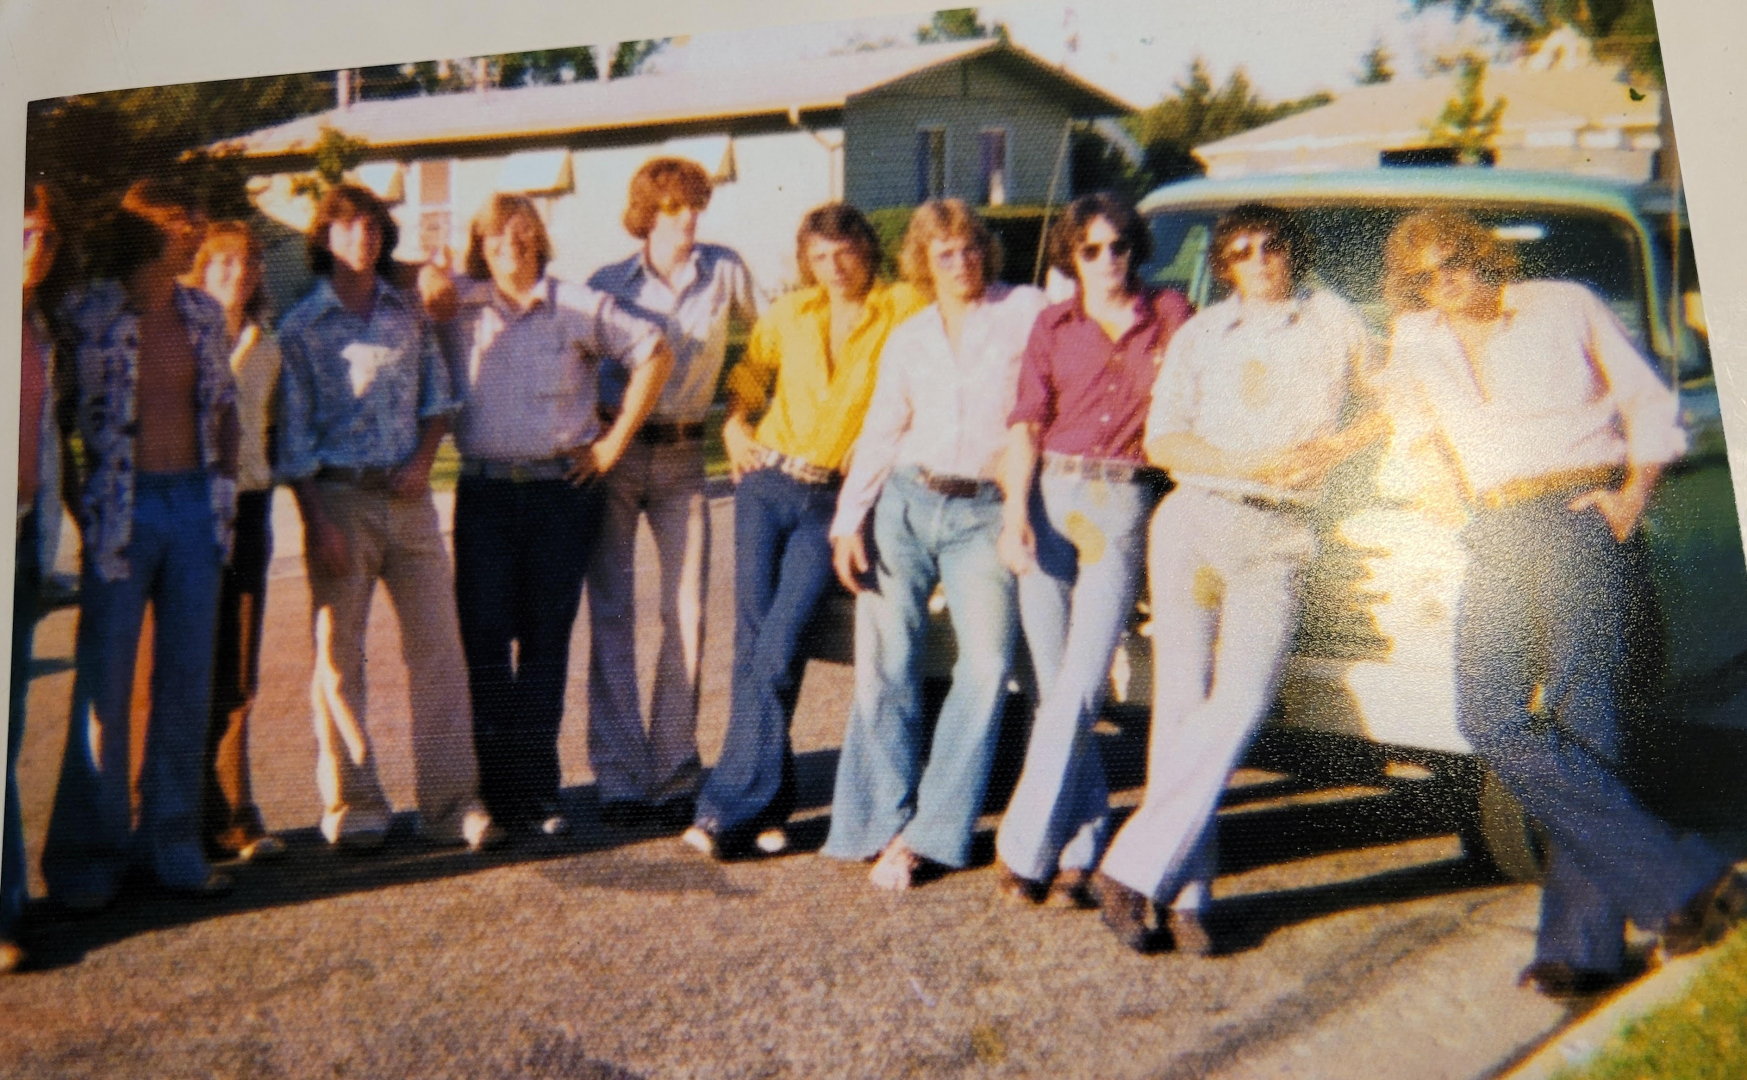 Classmate Steve Little’s band, Rebel (photo above circa 1974), performing Sat Aug 17, 1-4 pm at Raspberry Hill B & B Pavilion, 5500 240th St., Ames, IA, a mile out of Ames off Highway 30, west of Gateway near the S. Dakota Ave exit